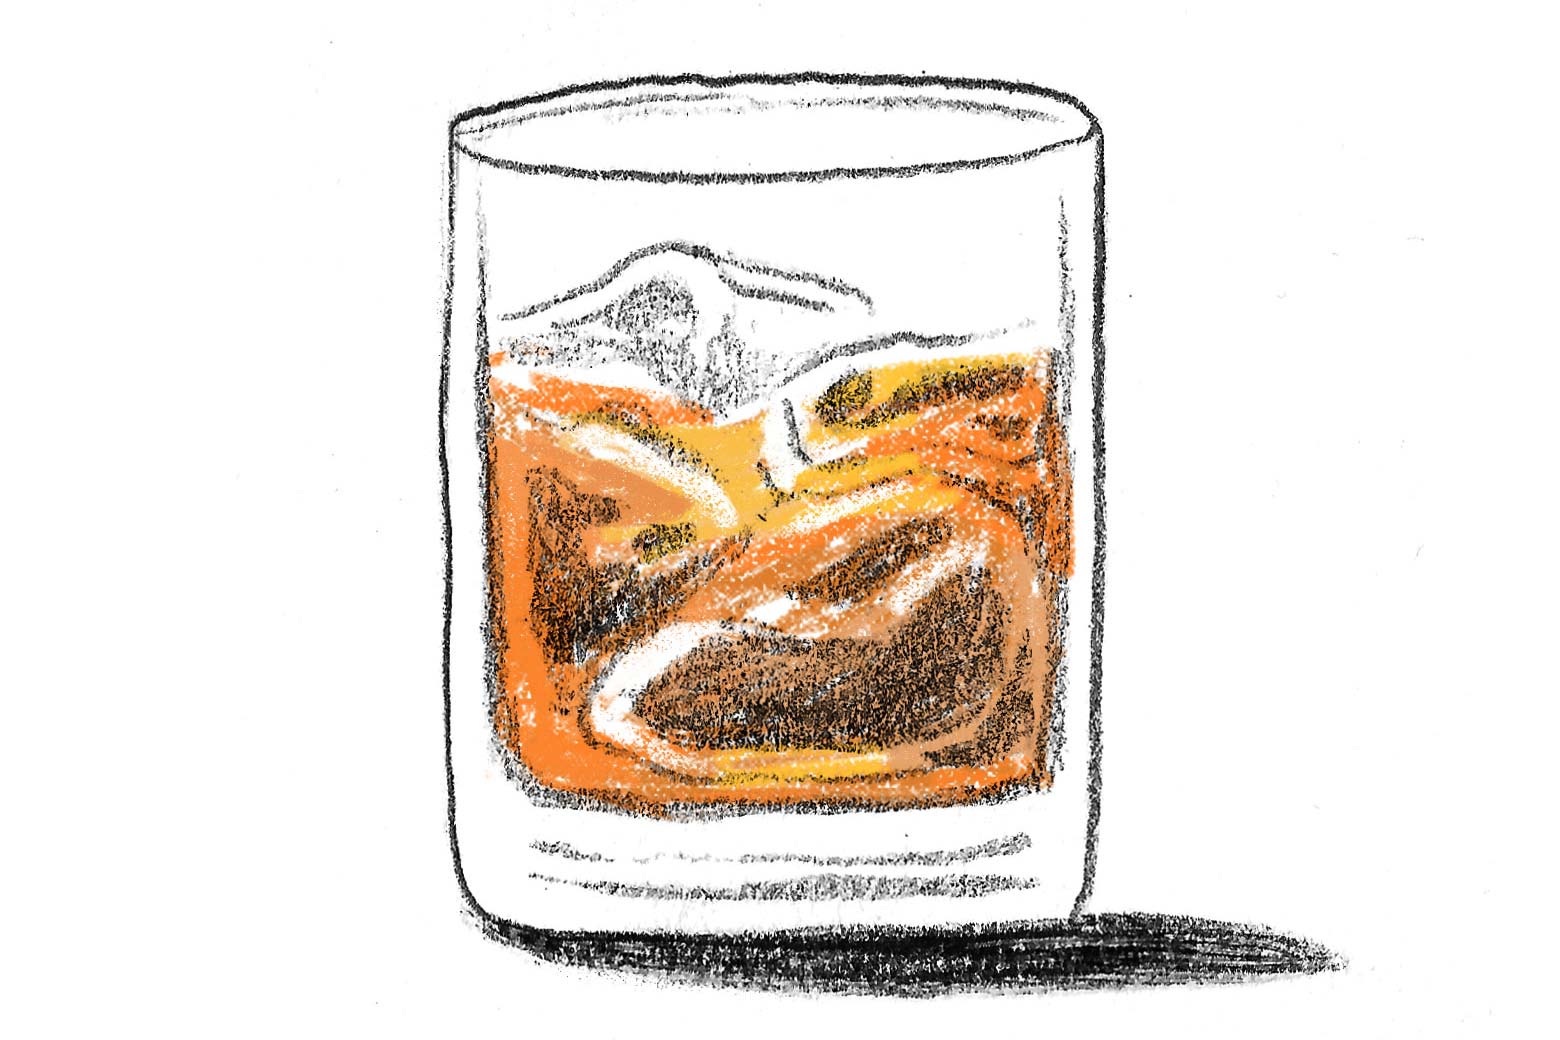 A glass of whiskey on the rocks.